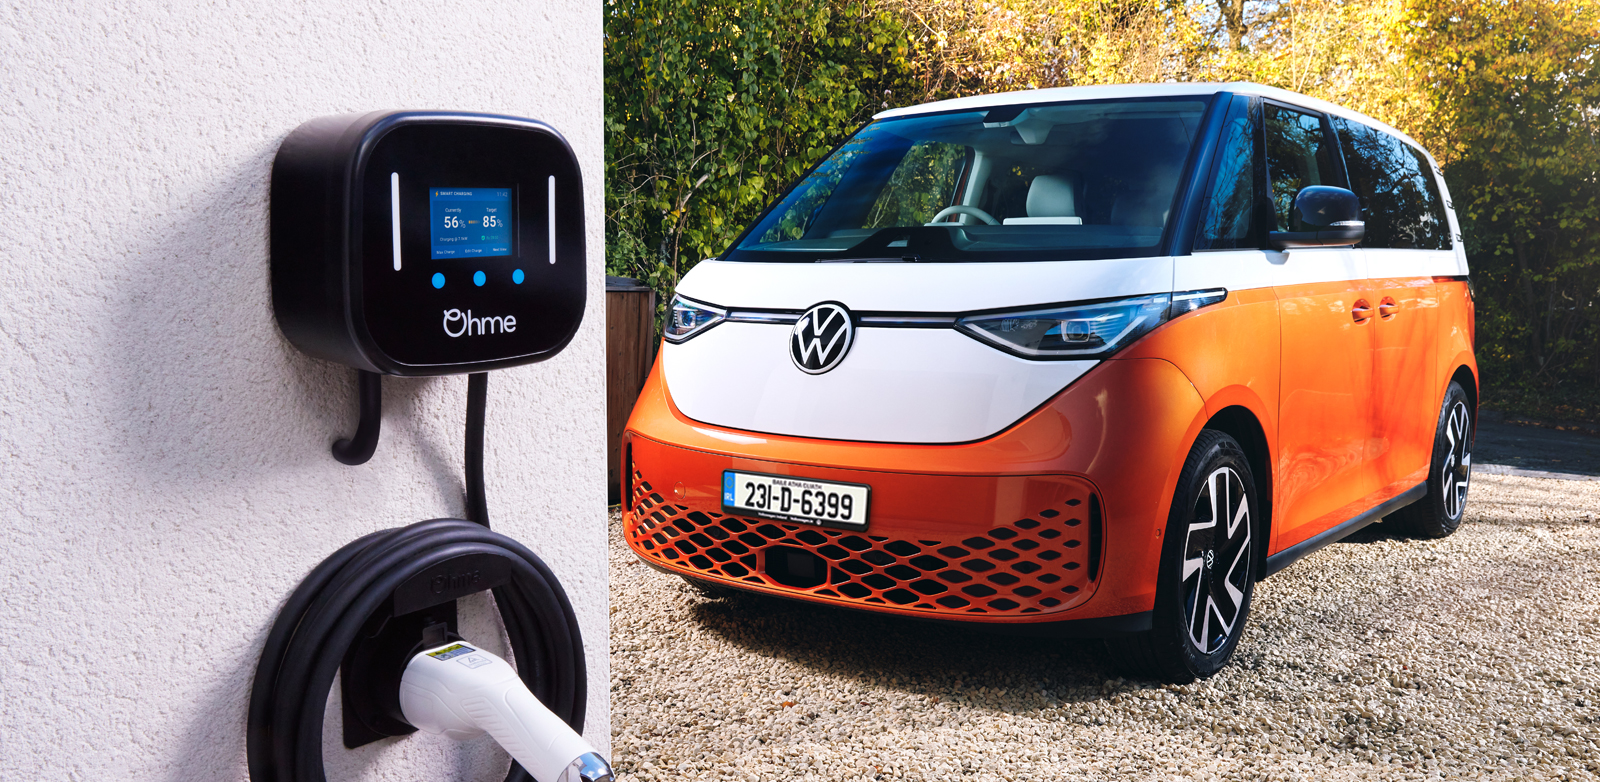 Ohme Home Pro EV Charger and Volkswagen ID Buzz